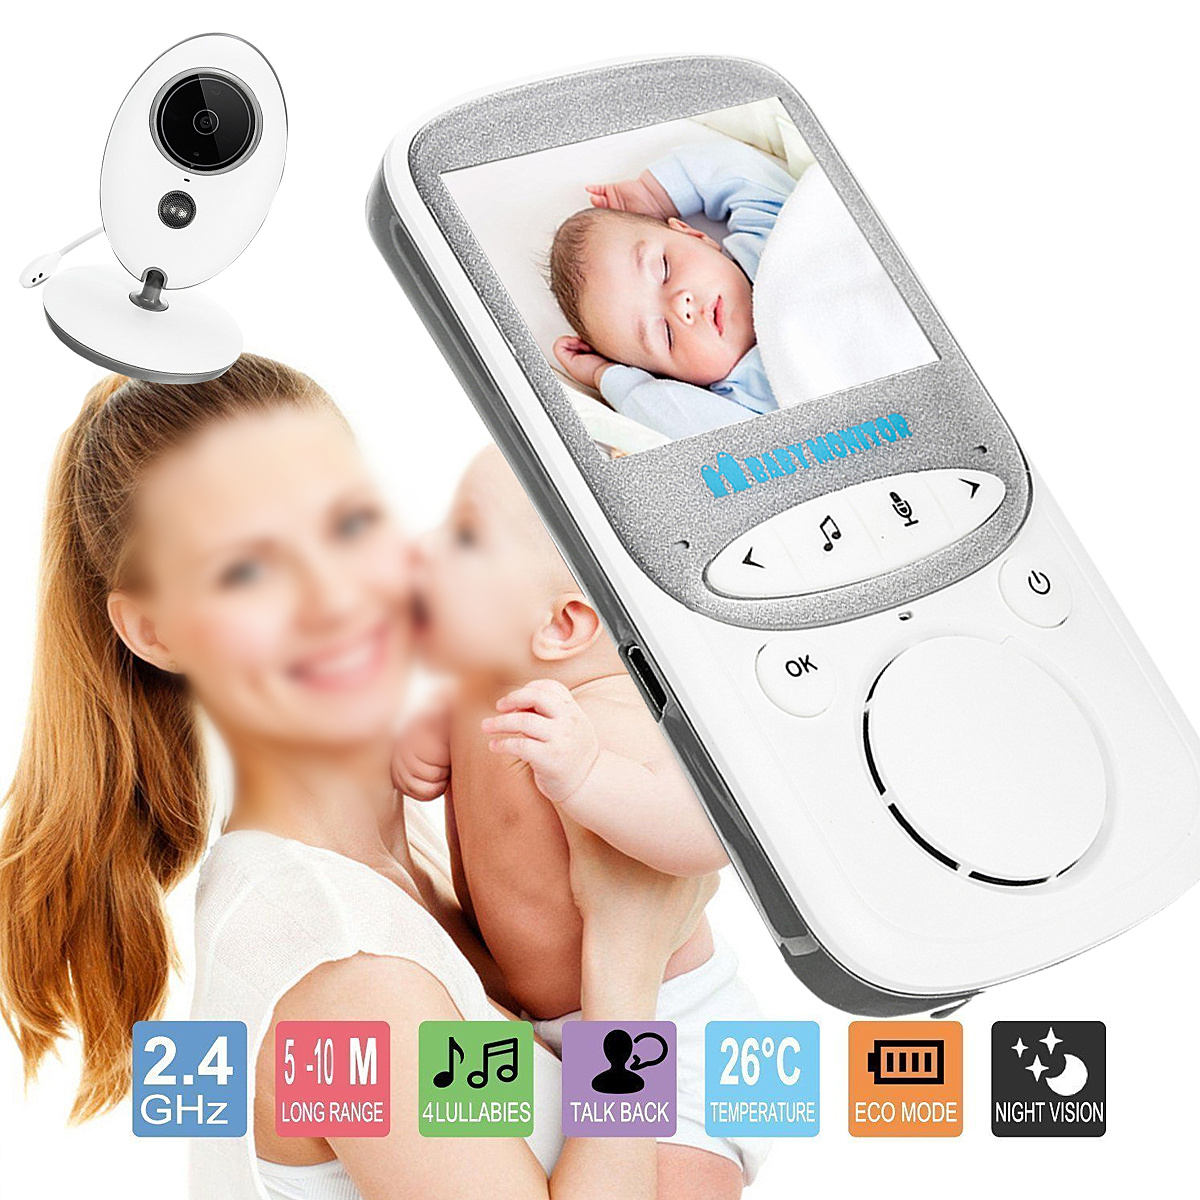 24G-Digital-Wireless-Night-Vision-LCD-Audio-Video-Security-Camera-Baby-Monitor-1151924